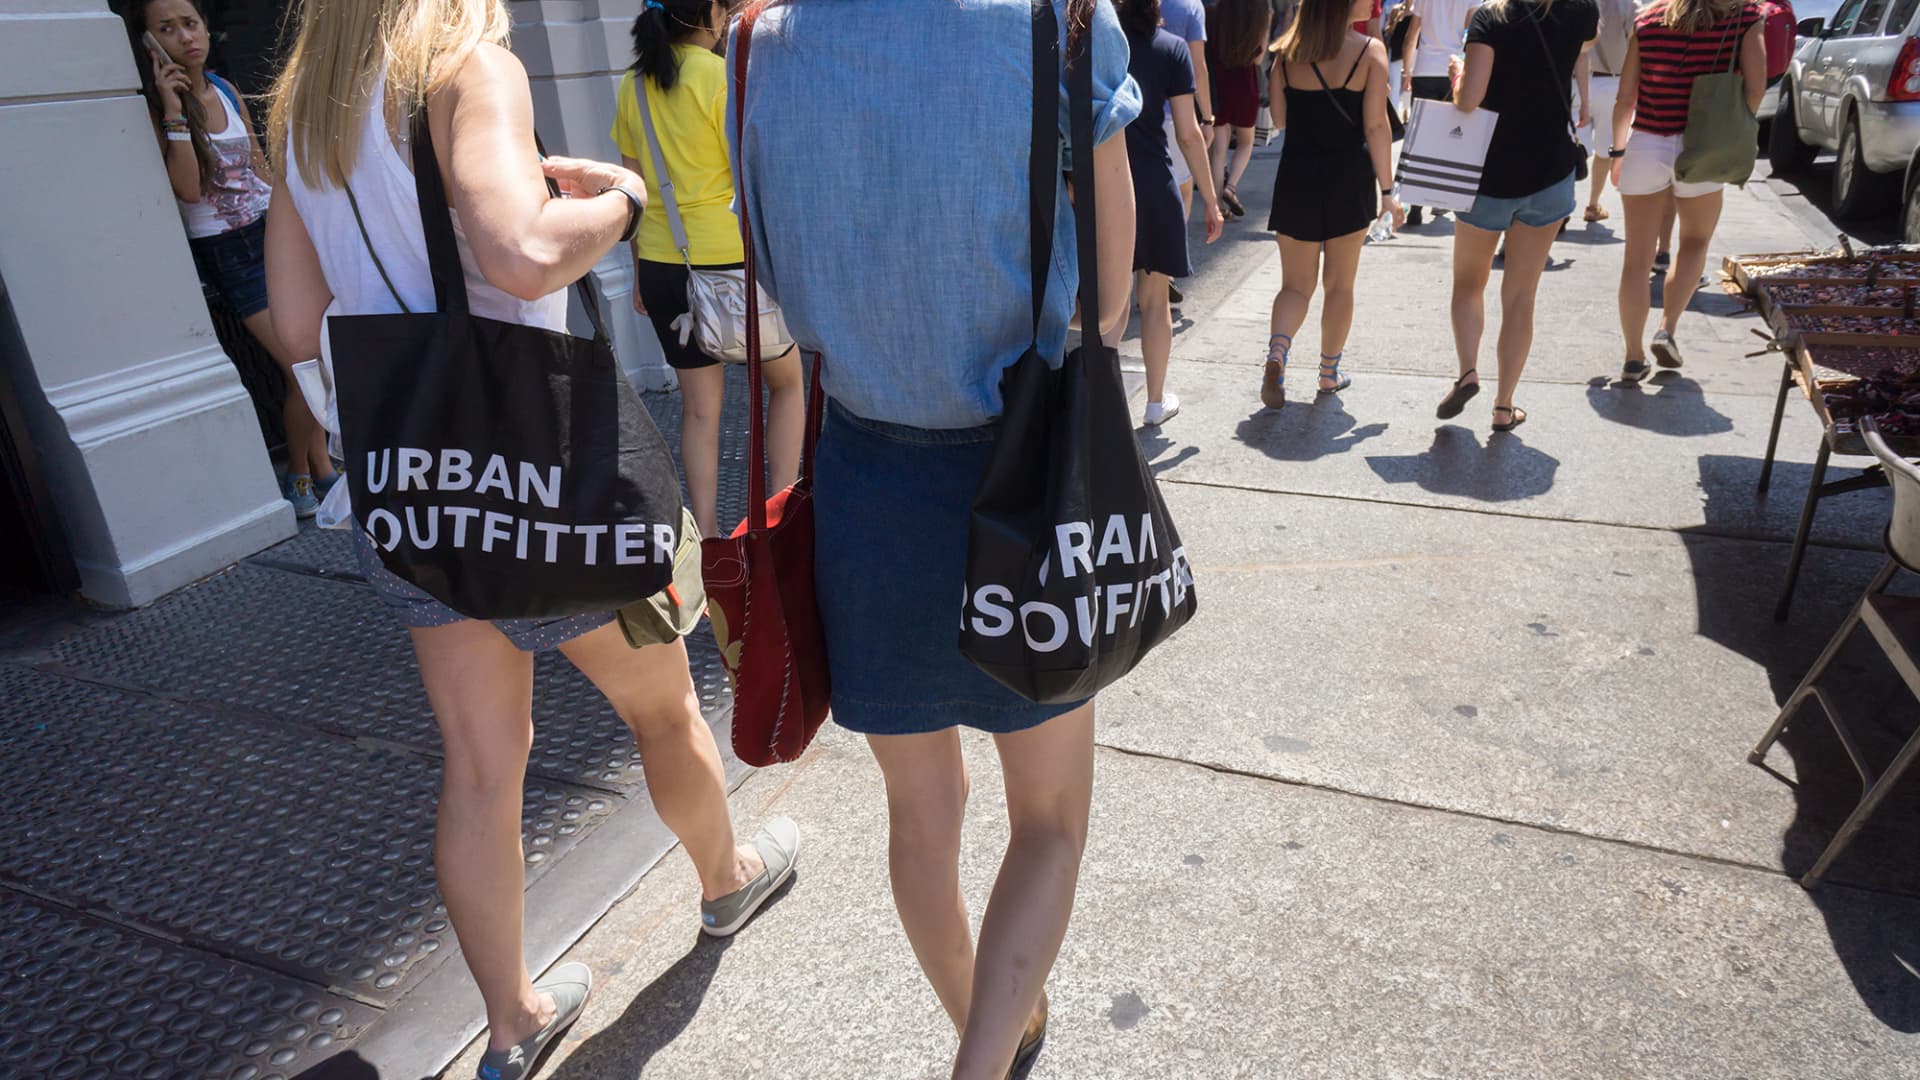 Shoppers with their Urban Outfitters shopping bags in Soho in New York